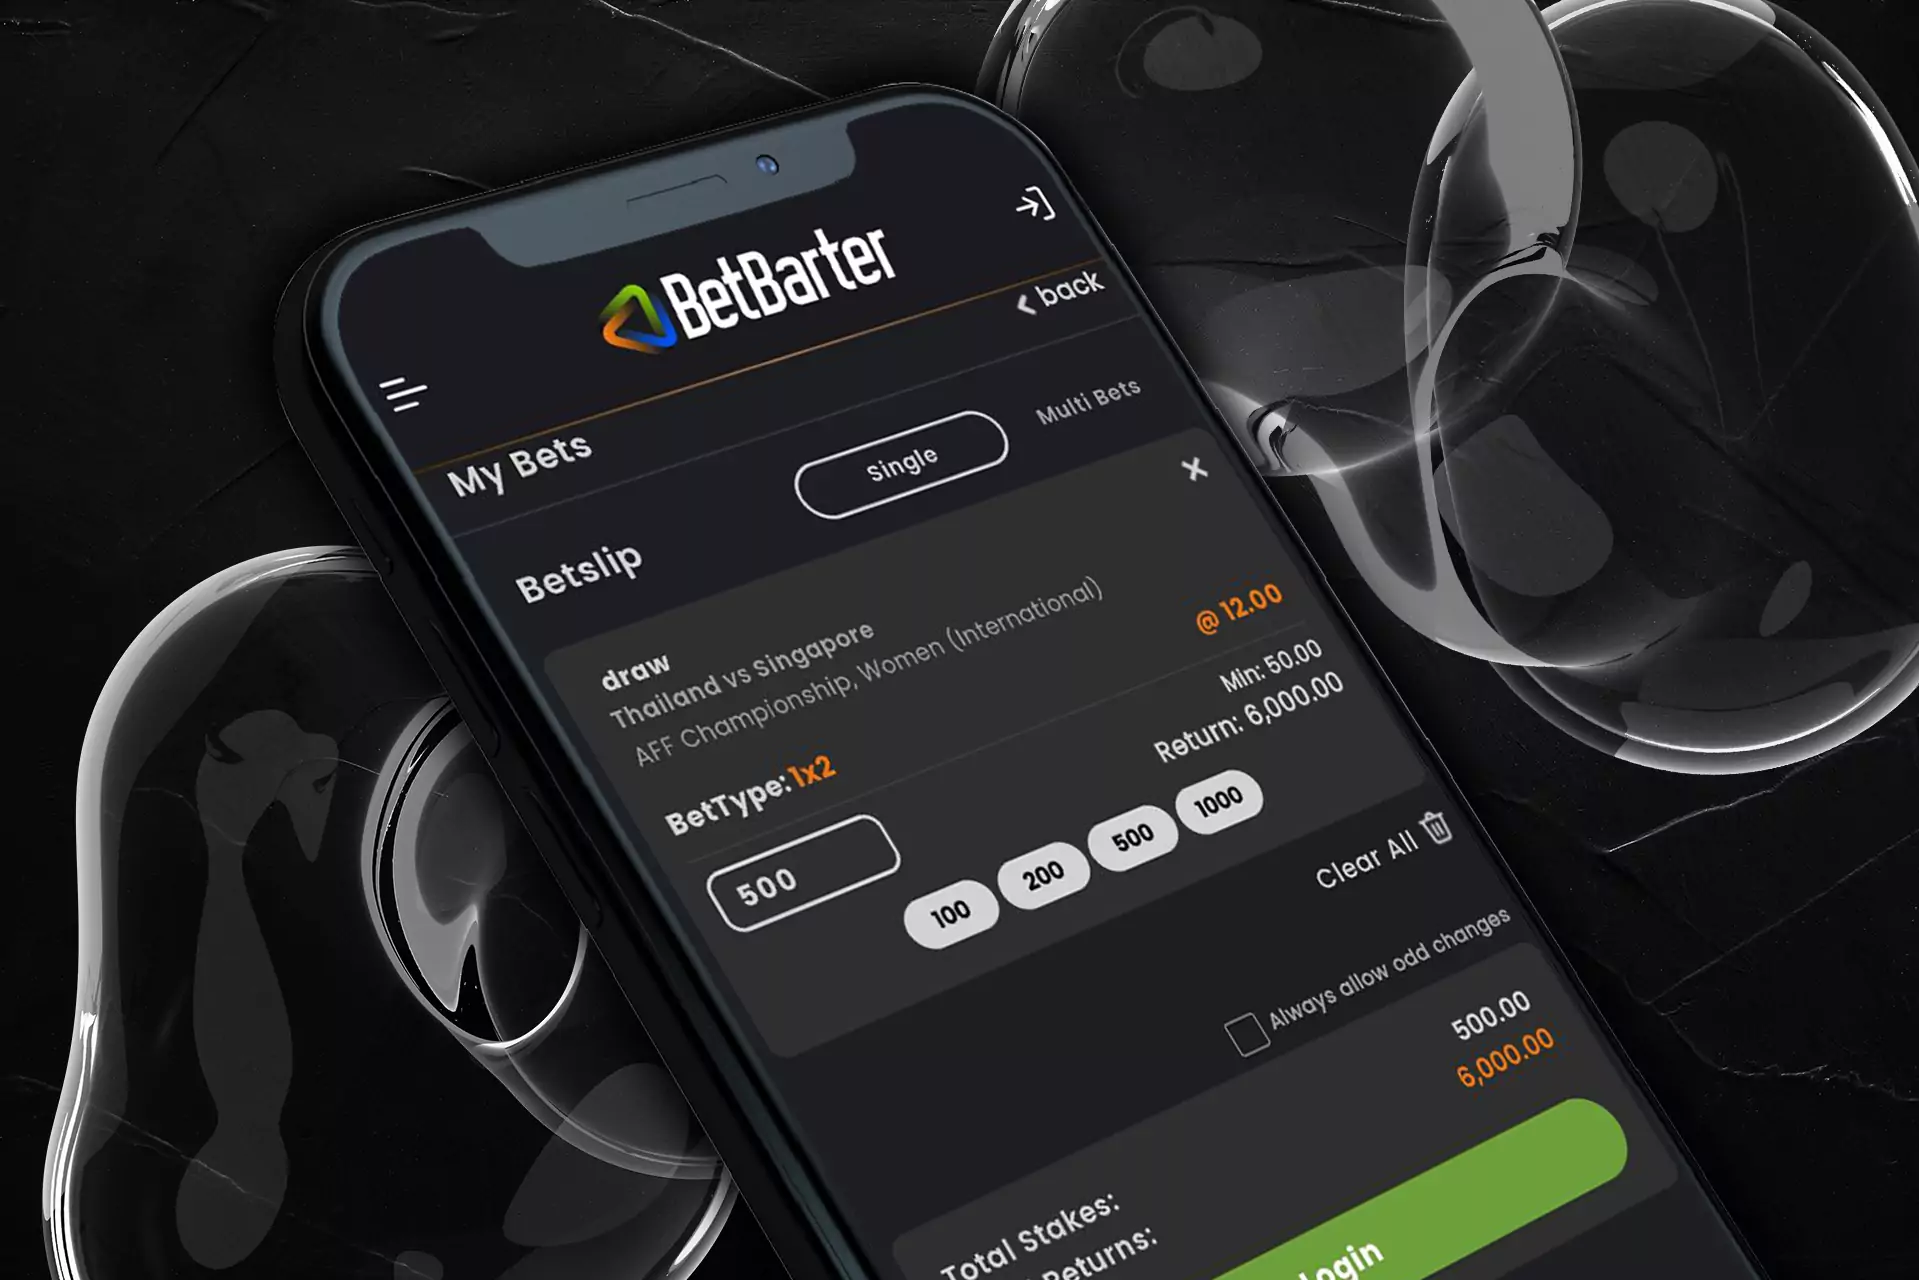 The Betbarter app supports various types of bets online.